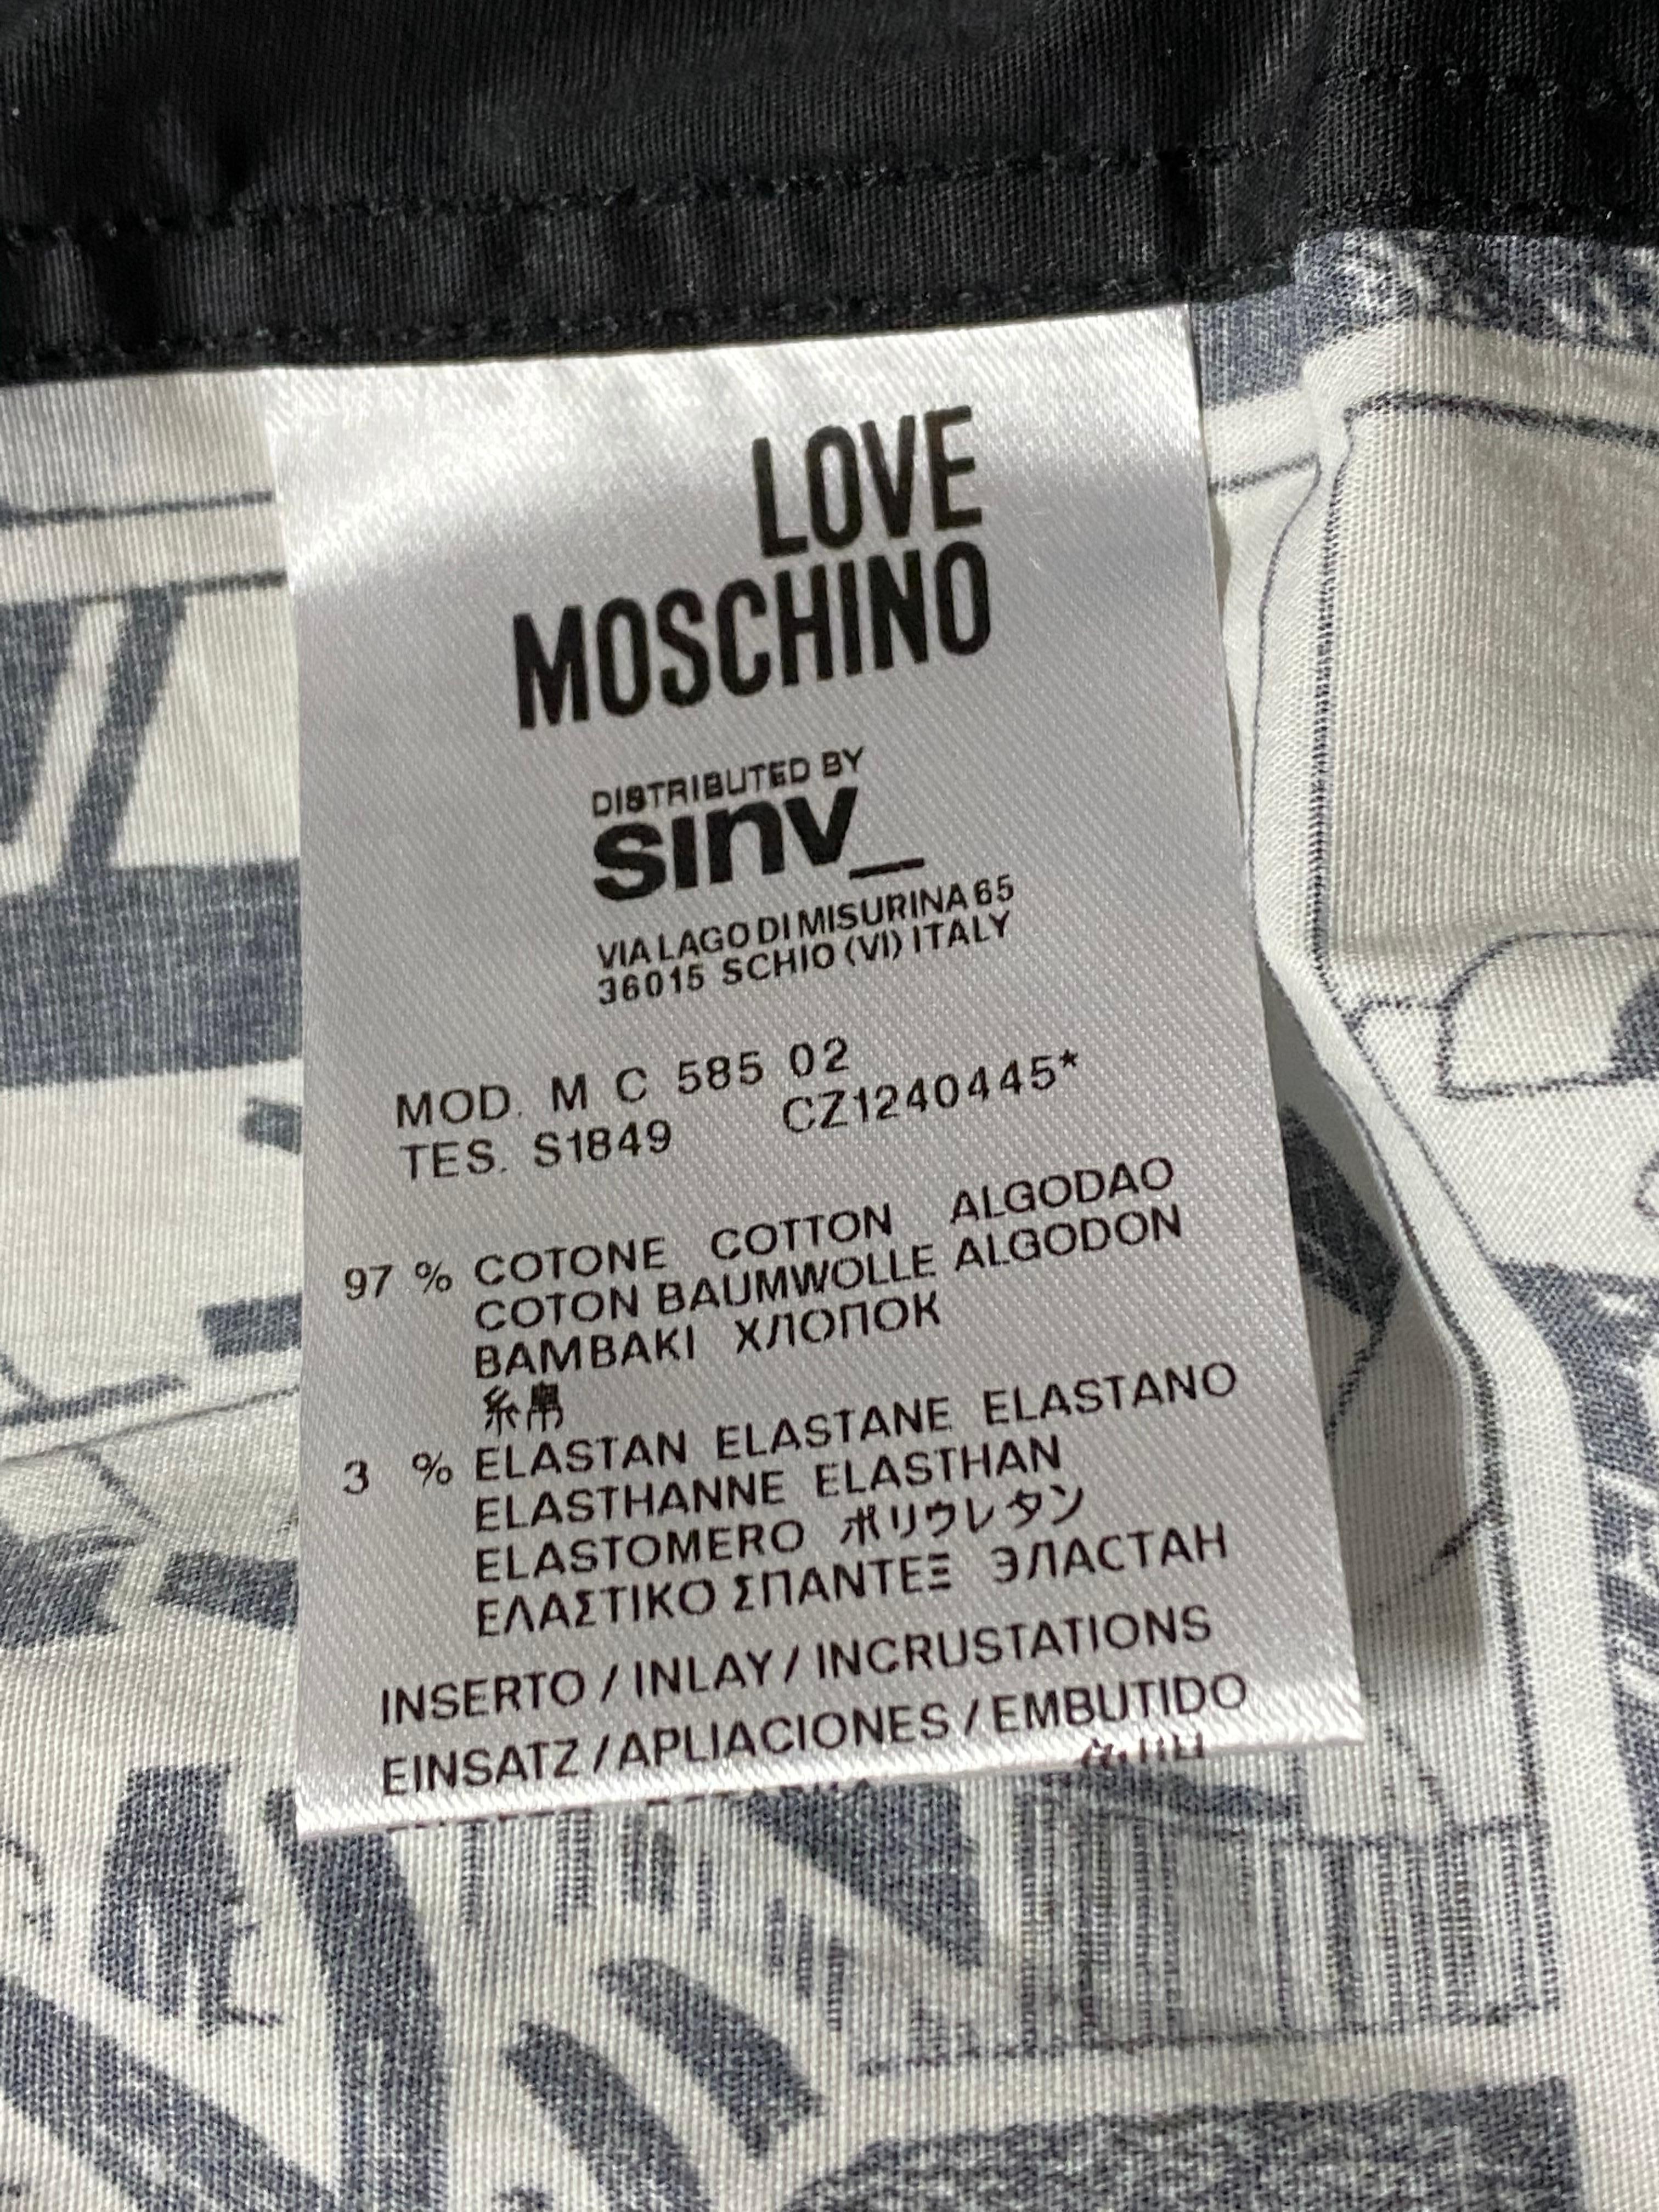 Moschino Love Black and White Graphic Button Down Shirt, Size XXL 2